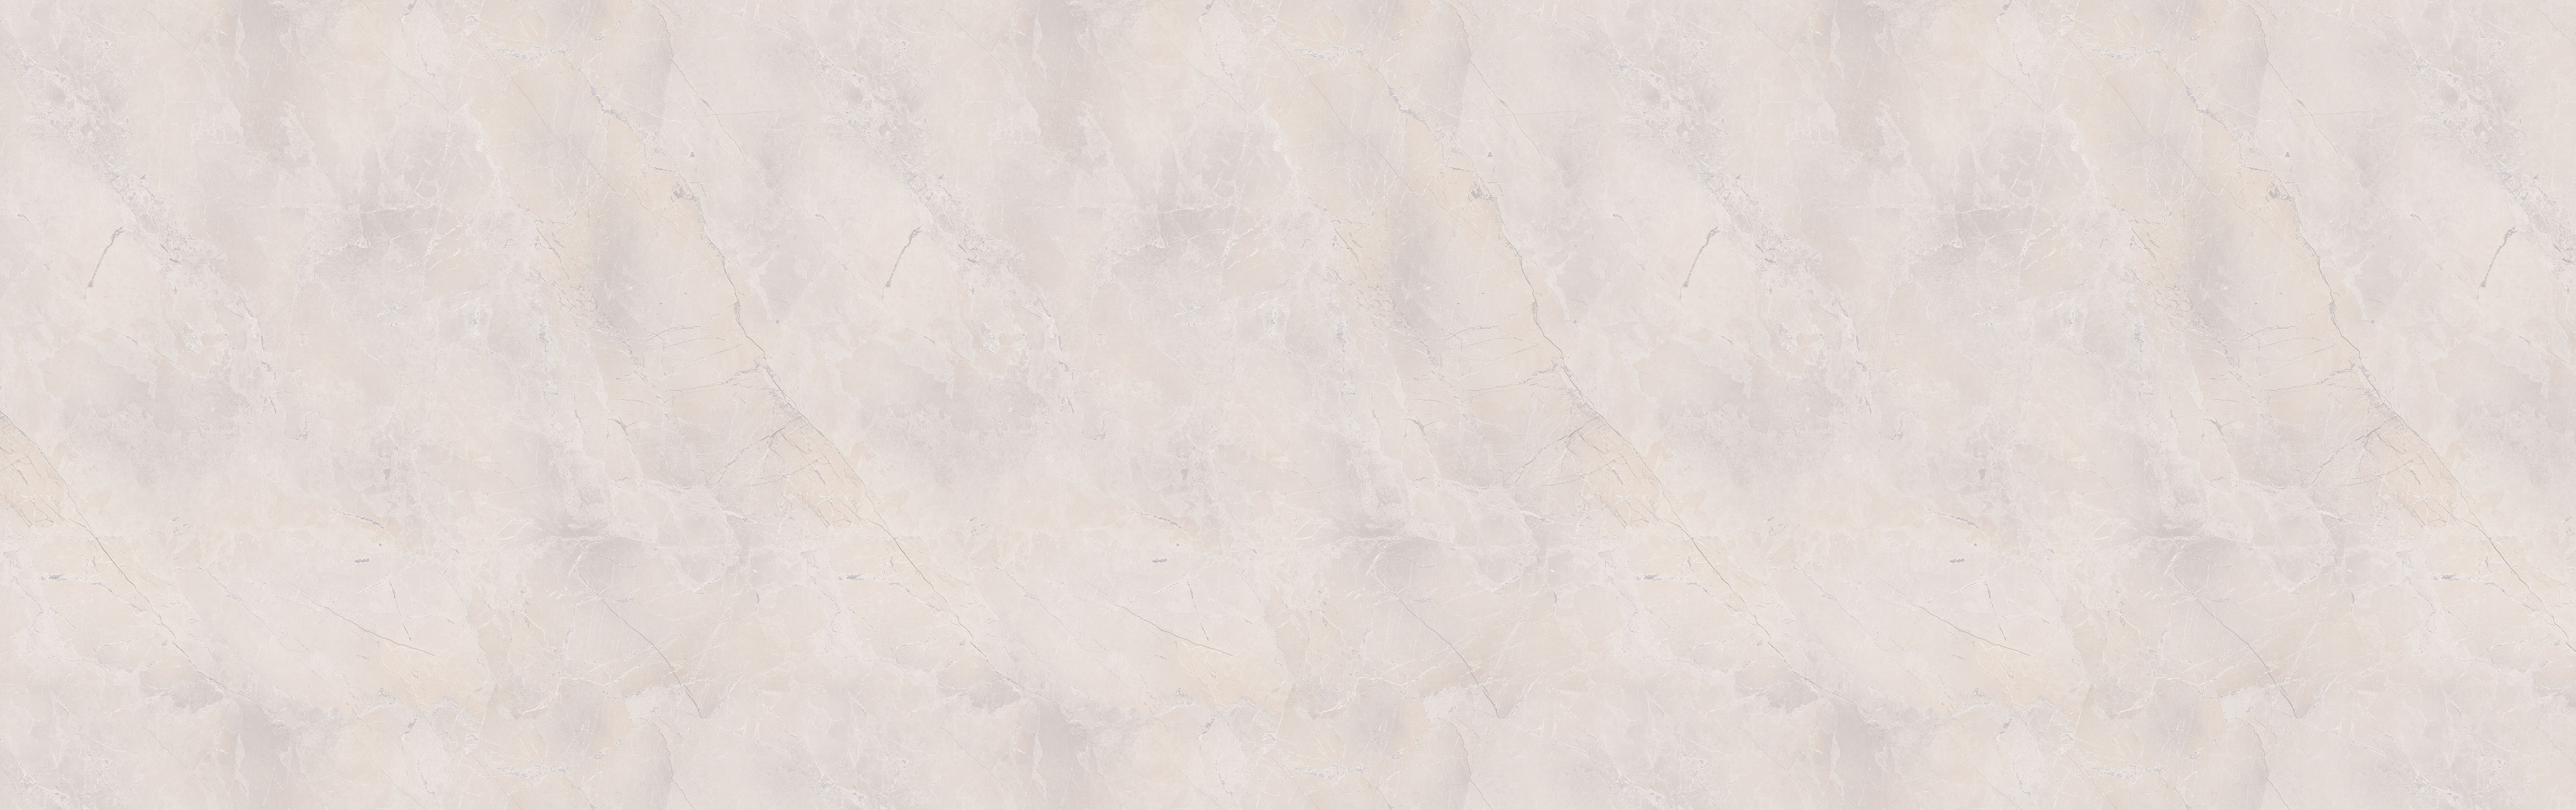 Silver Marble 6035 